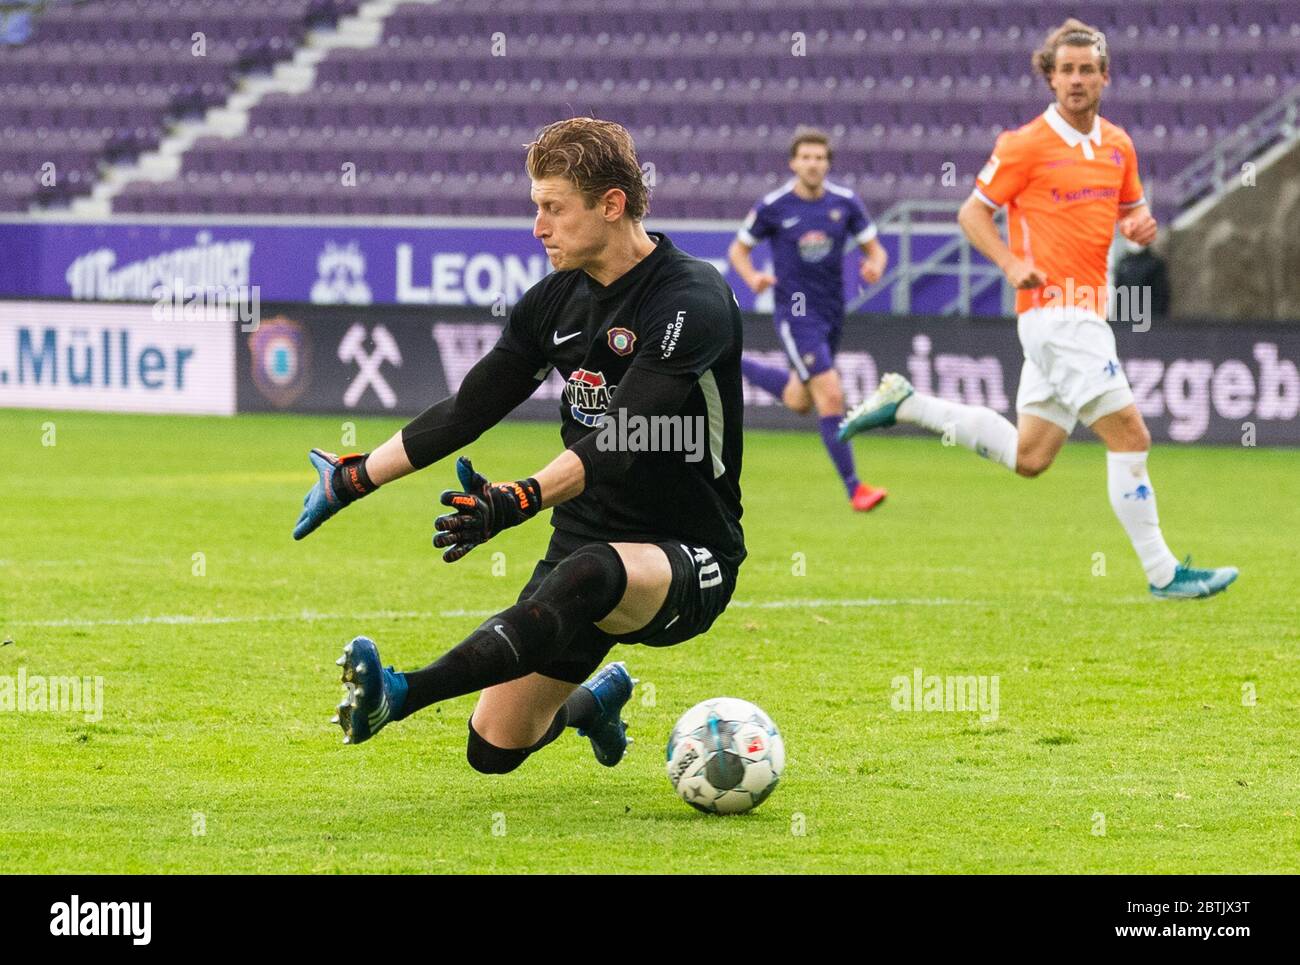 Aue, Germany. 26th May, 2020. Football: 2nd Bundesliga, FC Erzgebirge Aue - SV Darmstadt 98, 28th matchday, at the Sparkassen-Erzgebirgsstadion. Aue's goalkeeper Robert Jendrusch cannot prevent the goal for the 1:3. Credit: Robert Michael/dpa-Zentralbild - Pool/dpa - IMPORTANT NOTE: In accordance with the regulations of the DFL Deutsche Fußball Liga and the DFB Deutscher Fußball-Bund, it is prohibited to exploit or have exploited in the stadium and/or from the game taken photographs in the form of sequence images and/or video-like photo series./dpa/Alamy Live News Stock Photo